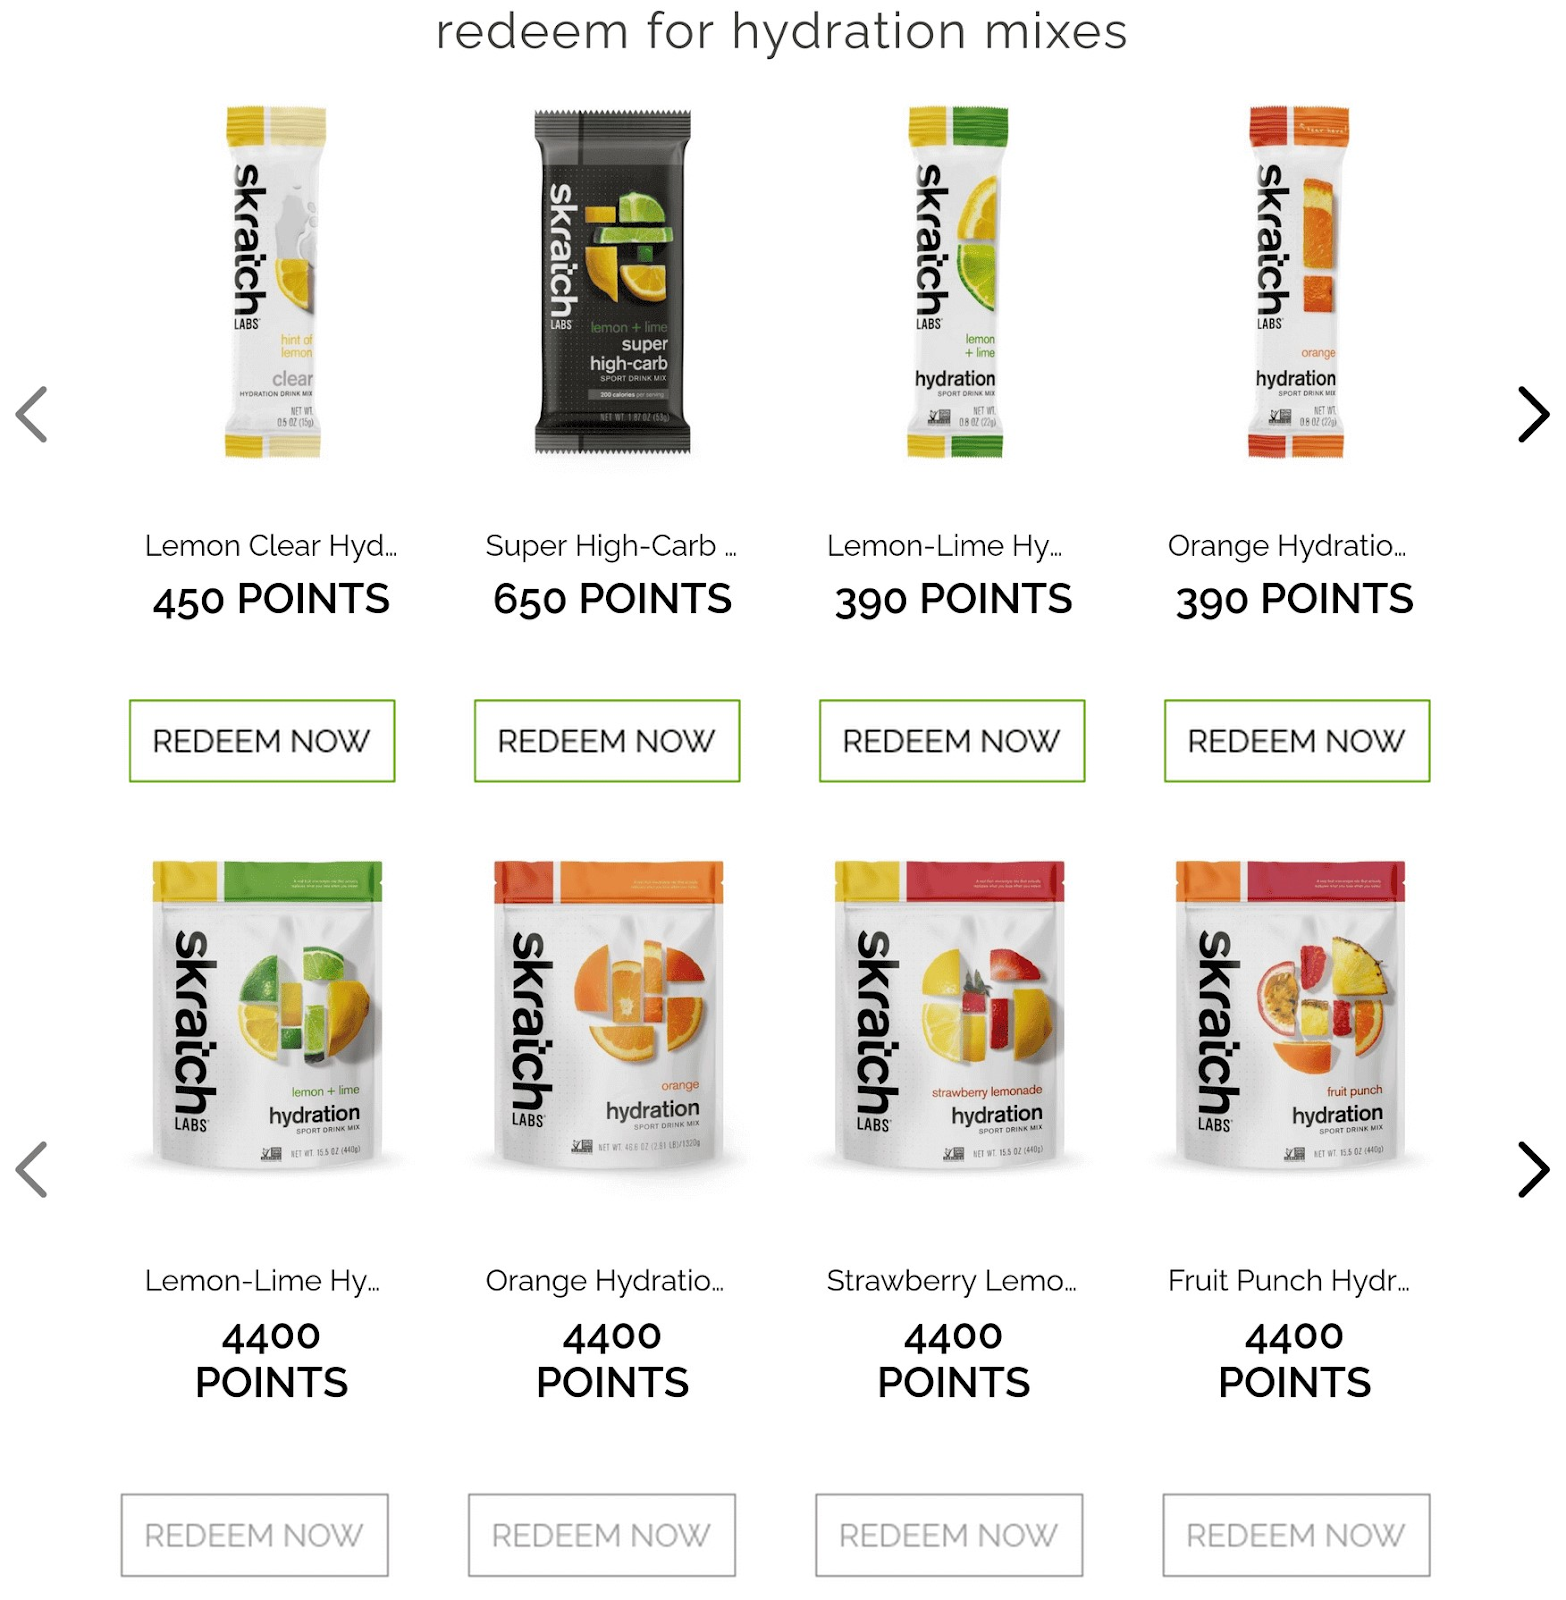 Skratch Labs's redeem page features products with "Redeem Now" buttons